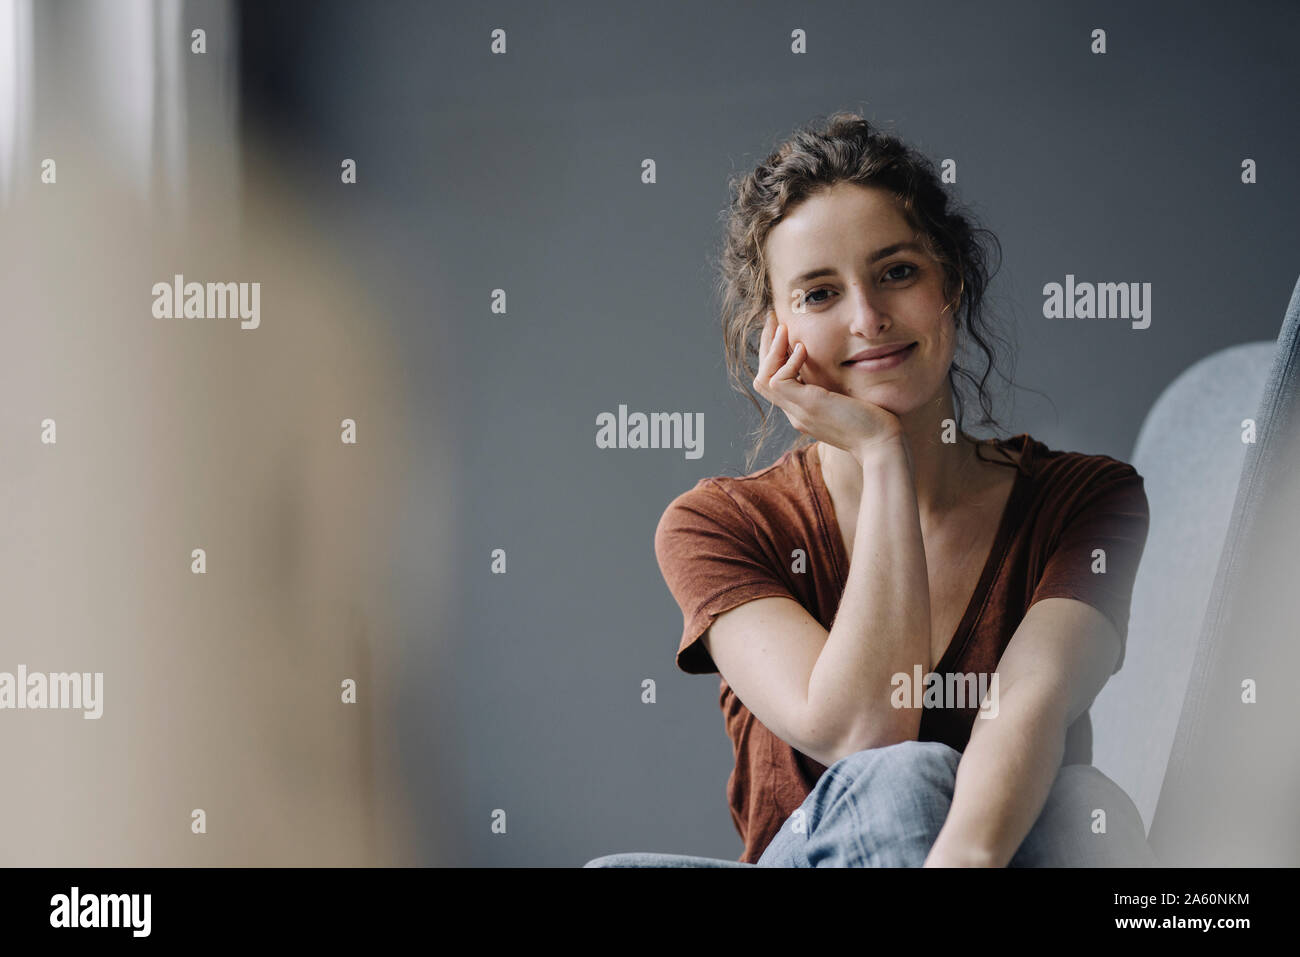 Portrait of smiling young woman relaxing at home Banque D'Images